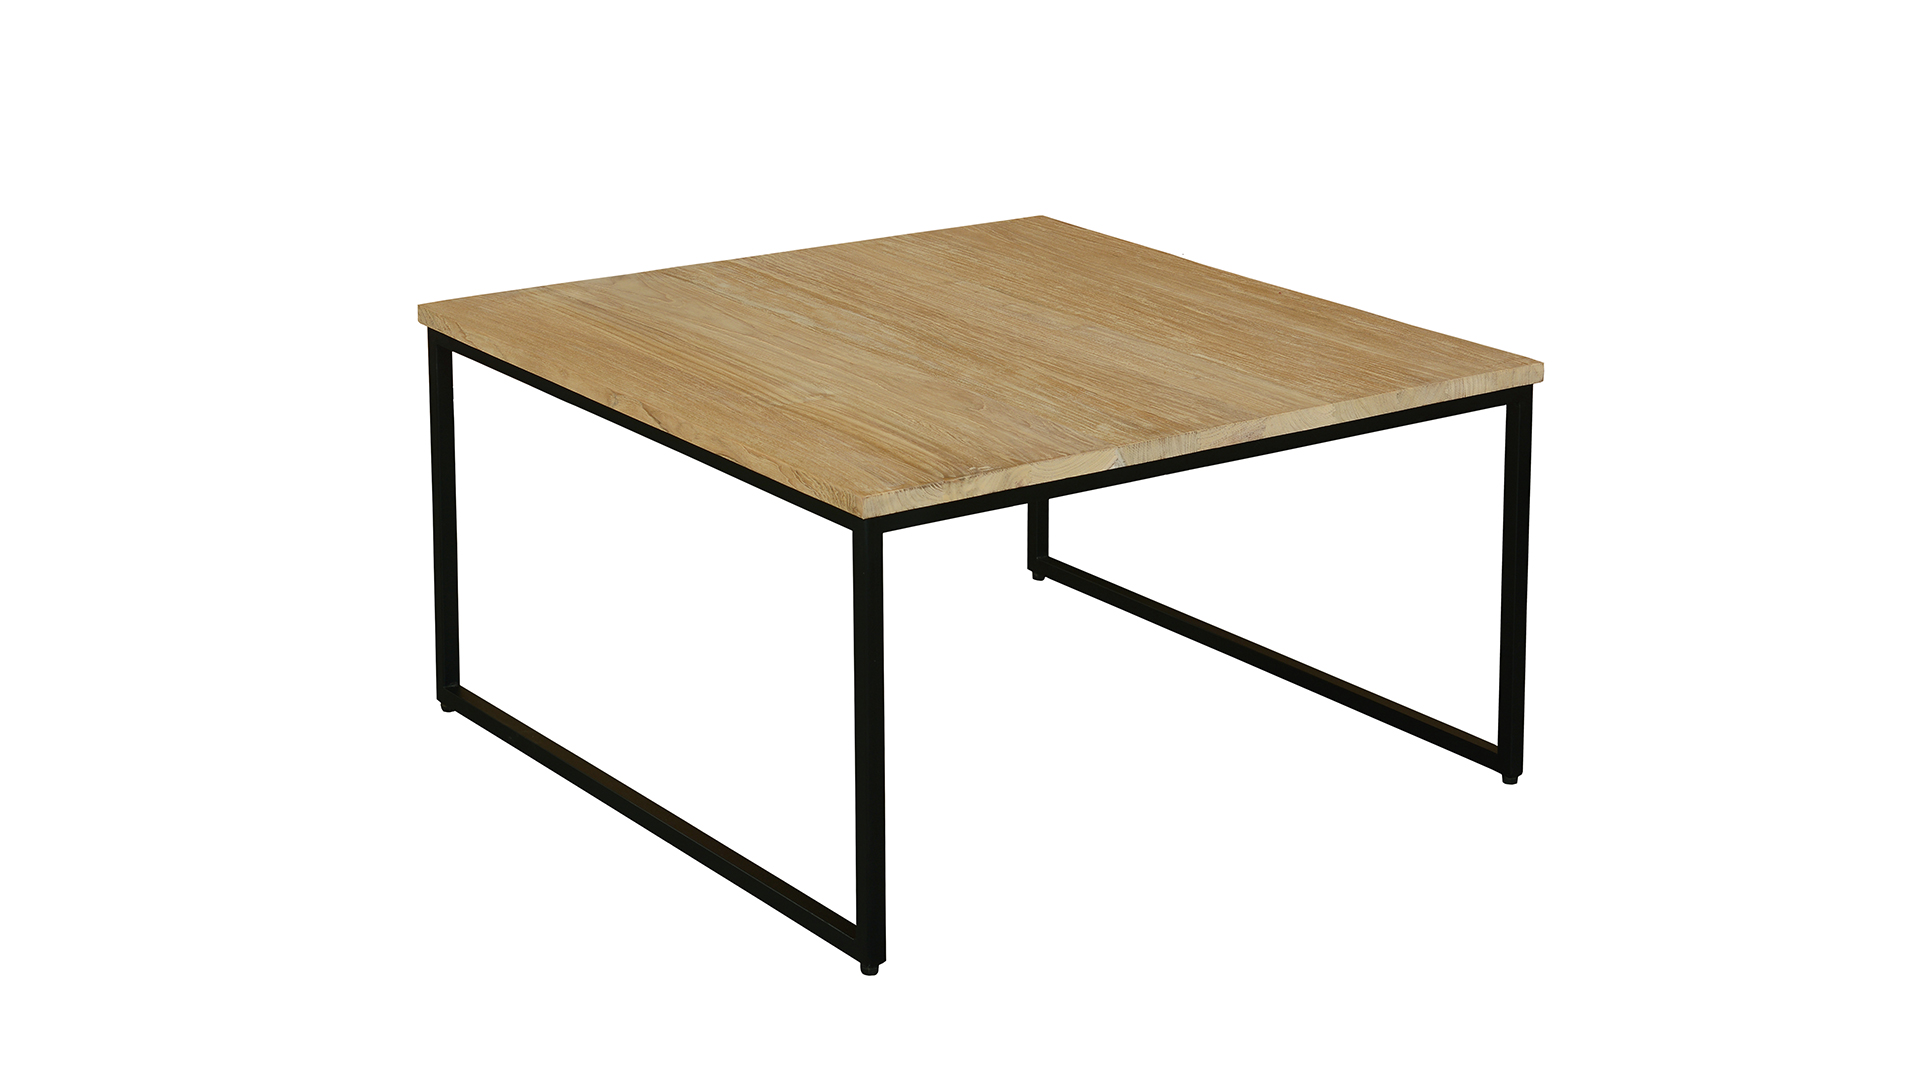 Modena Coffee Table Square With Black Metal Frame 080cm Teak Light Brushed - Diamond Collection